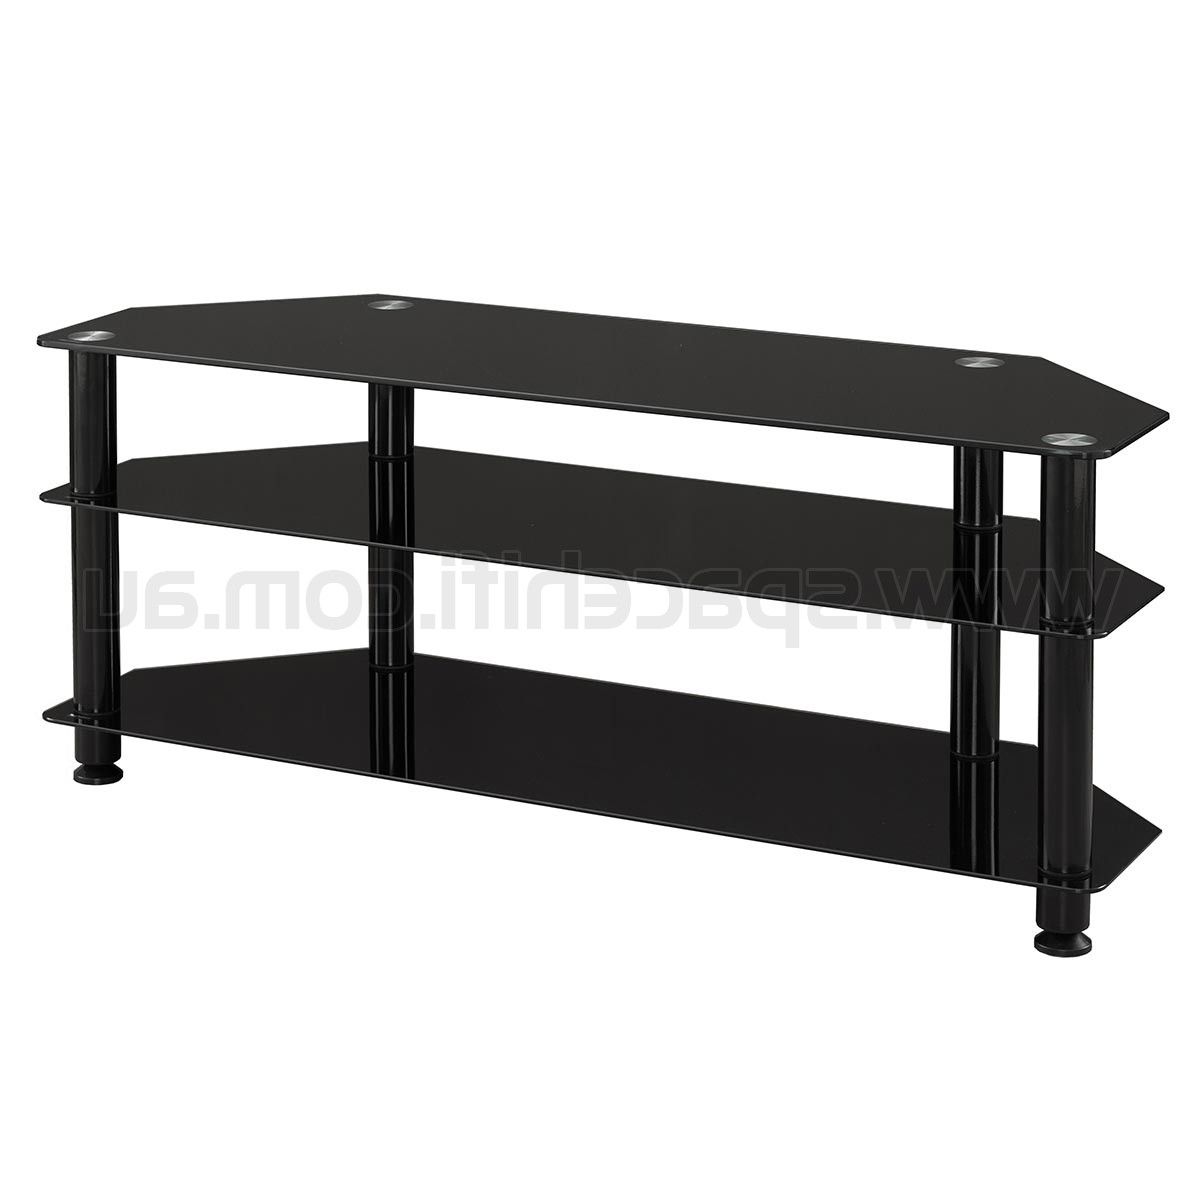 Tauris Ace 1200mm 3 Shelf Glass Tv Unit Stand – Black (View 8 of 20)